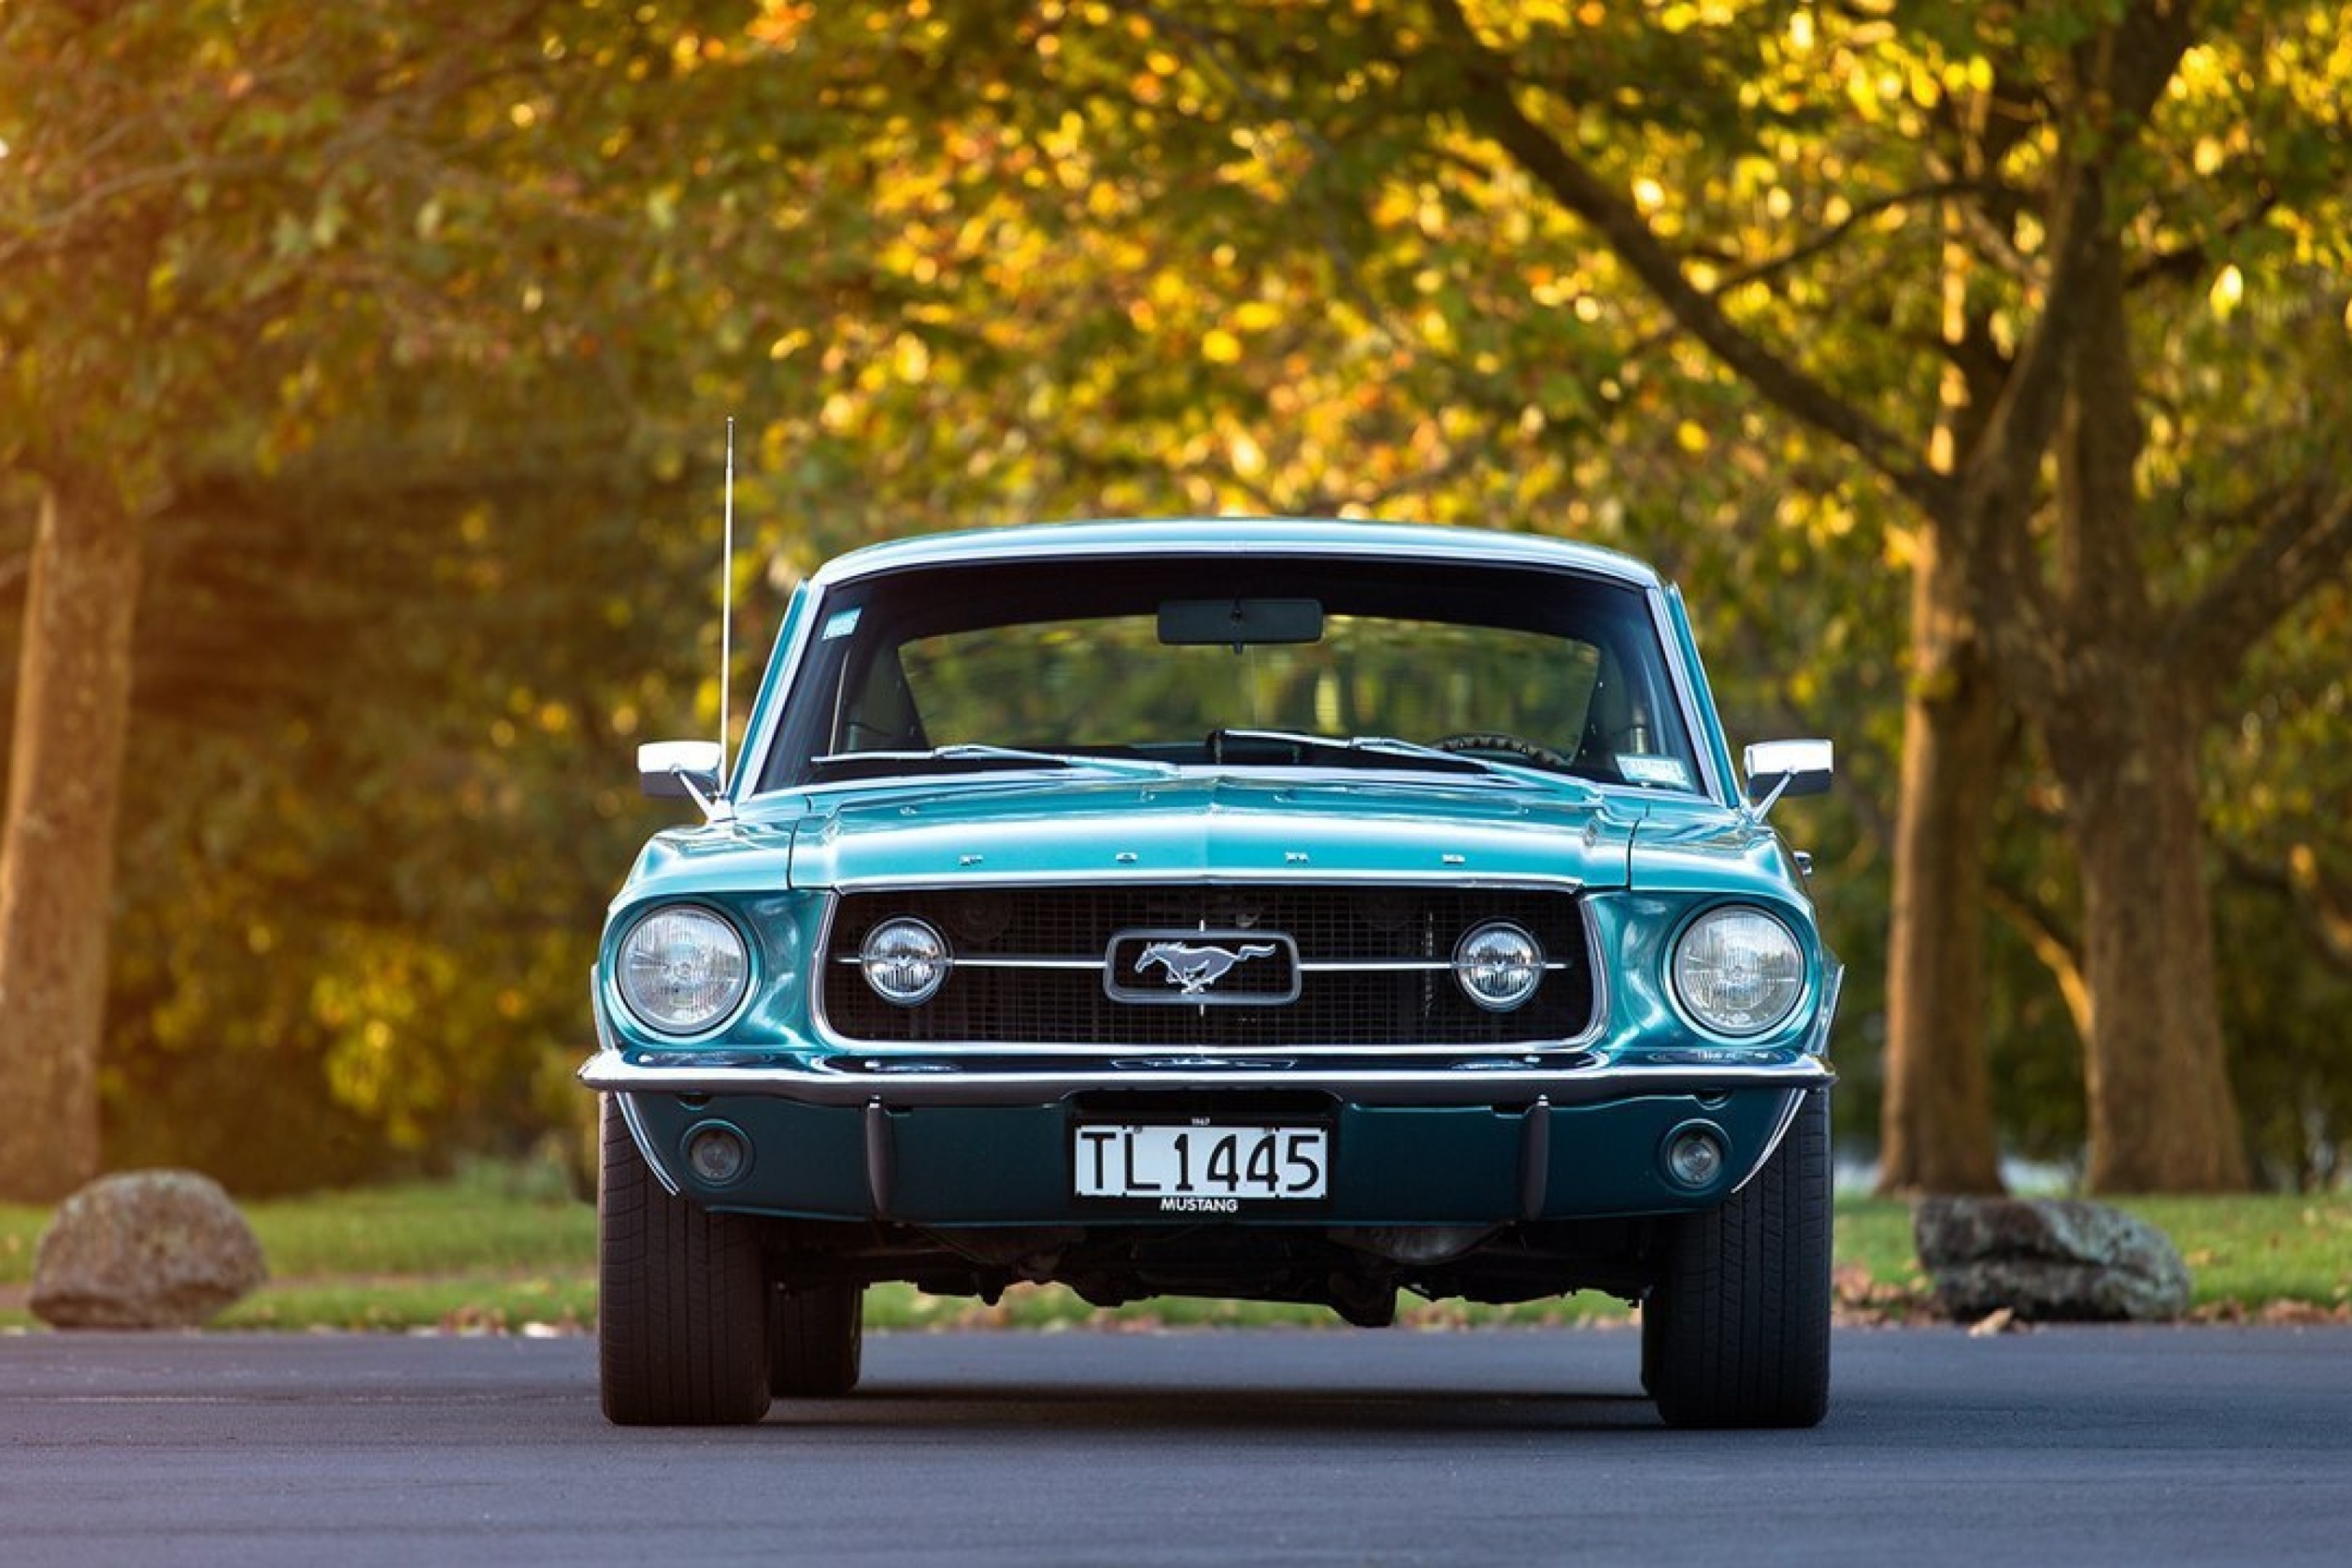 Ford Mustang First Generation wallpaper 2880x1920